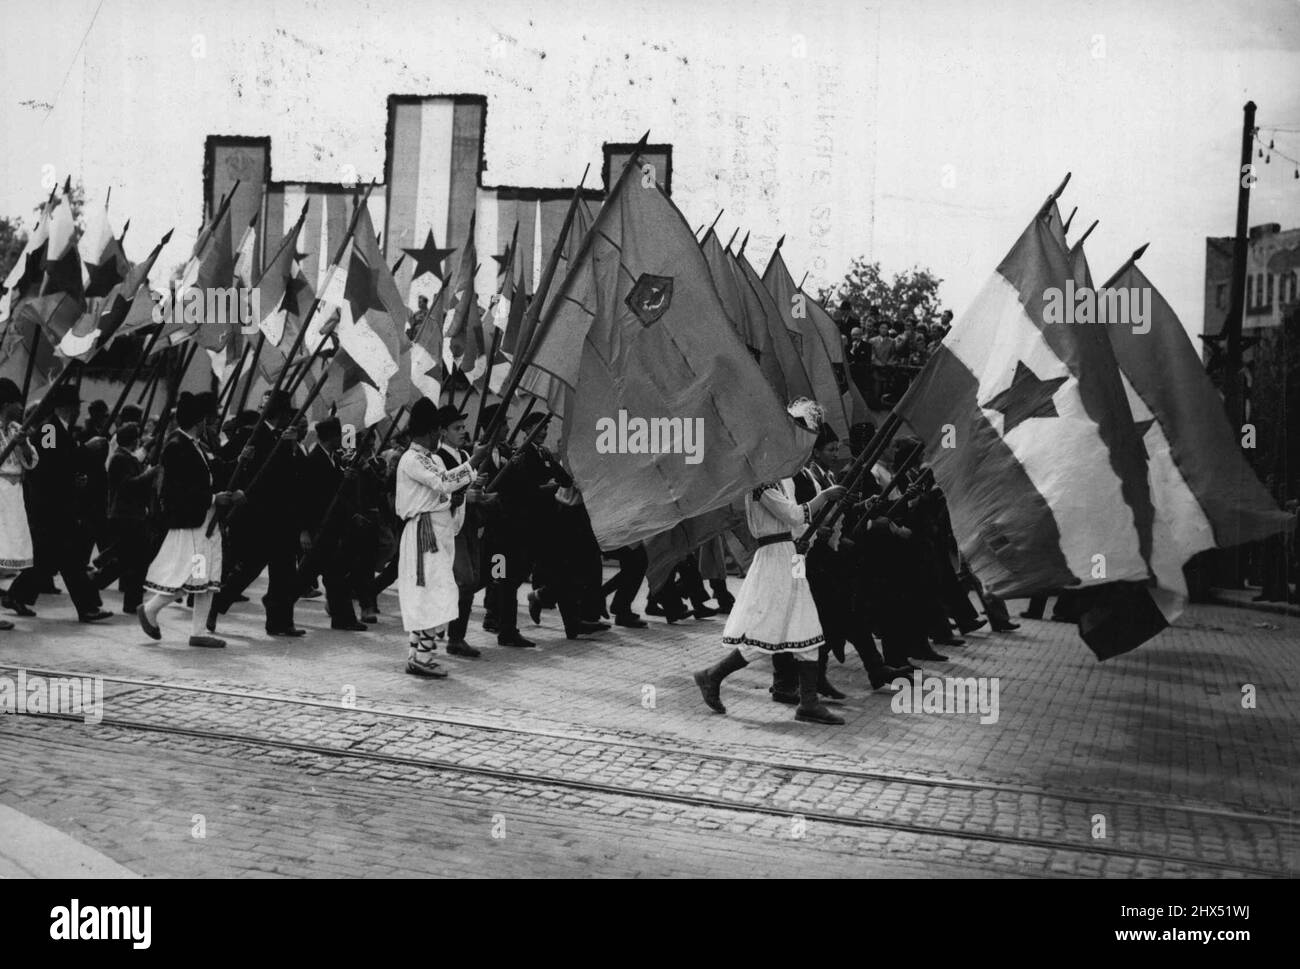 Belgrade May Day Celebrations -  A section of the May Day Procession in Belgrade seen carrying Yugoslav Flags, May 1.Some Two hundred thousands people of Belgrade, Both old and Young, took part in a Mammoth Procession which formed part of the Yugoslav Capital's May Day celebrations, May 1. Marshal Tito, wearing his new Marshal's Uniform, Saluted, clapped and waved from the stand in the centre of the city, as the procession - The first since the war passed by. Portraits of Tito and Stalin were barried in procession, while National songs were chanted by schoolchildren. September 02, 1949. (Photo Stock Photo